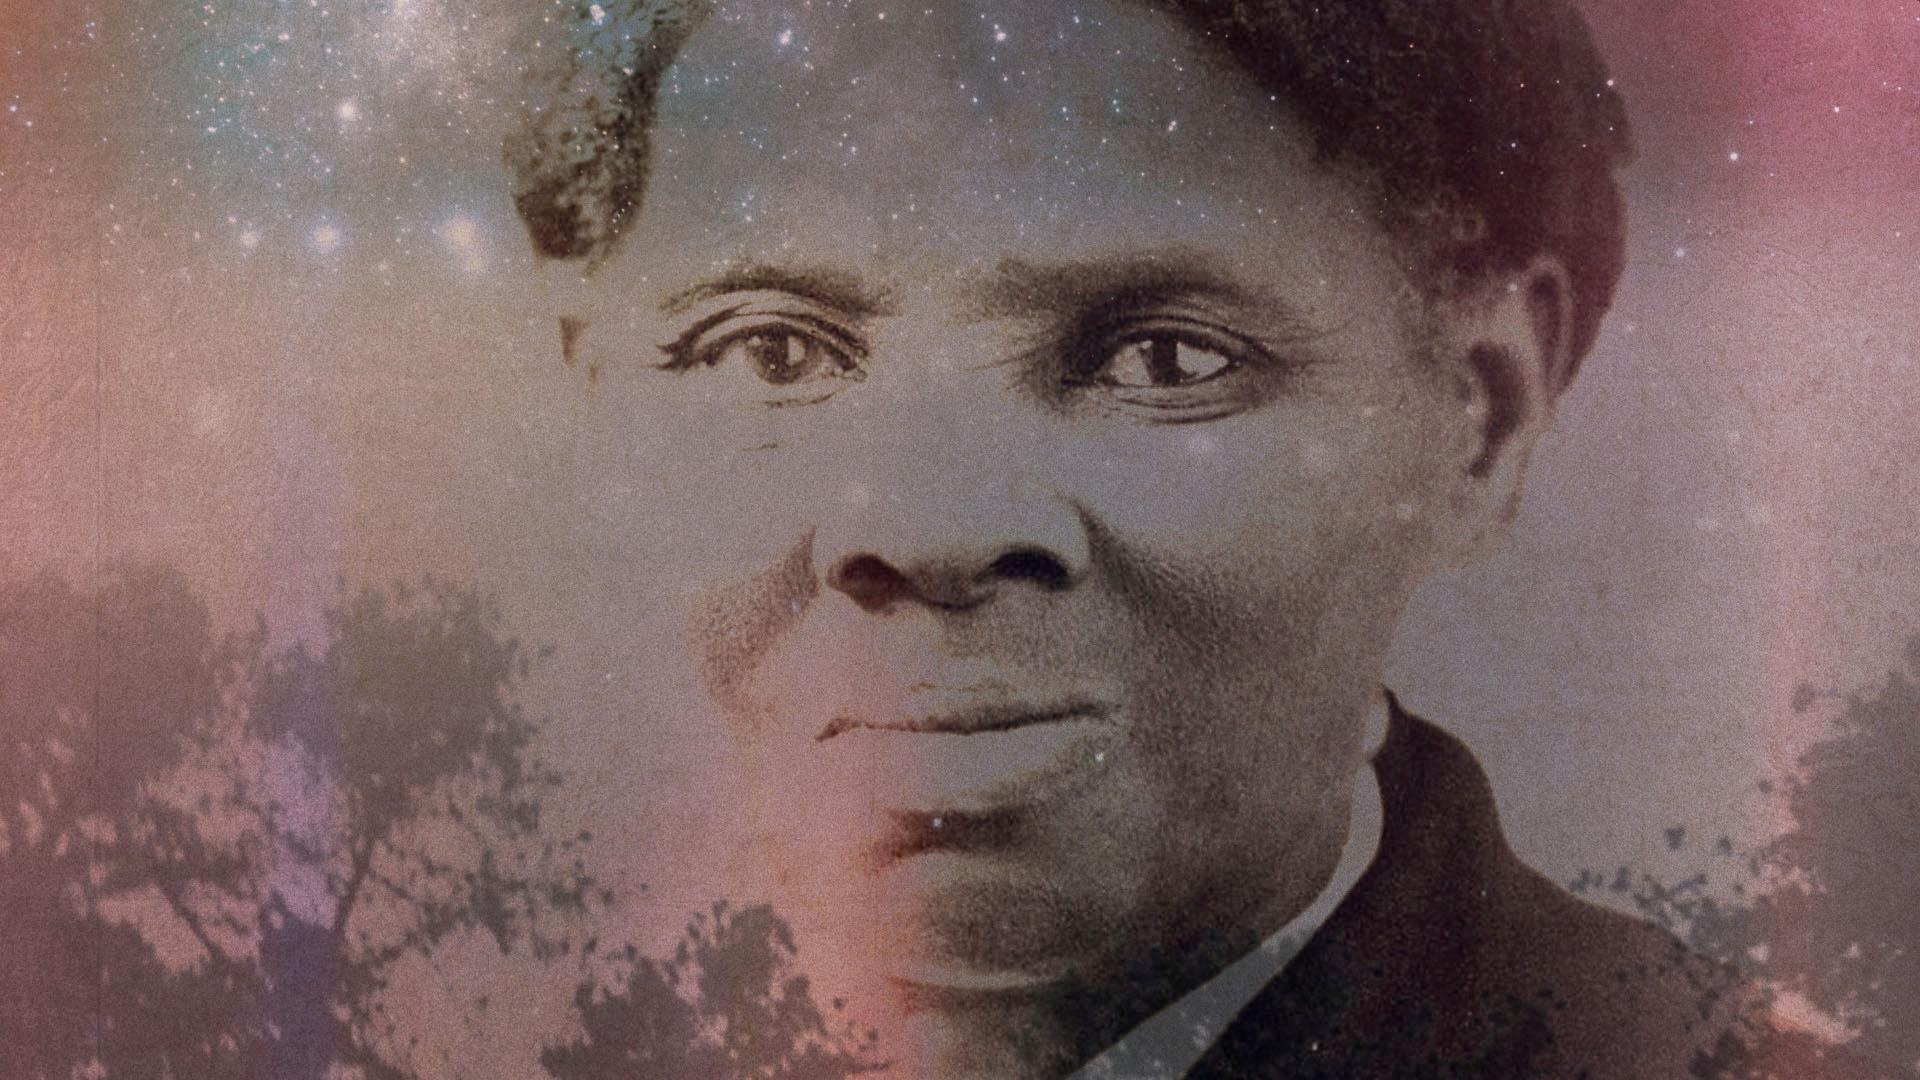 Harriet Tubman: Visions of Freedom key art showing Harriet Tubman's face with a stylized background